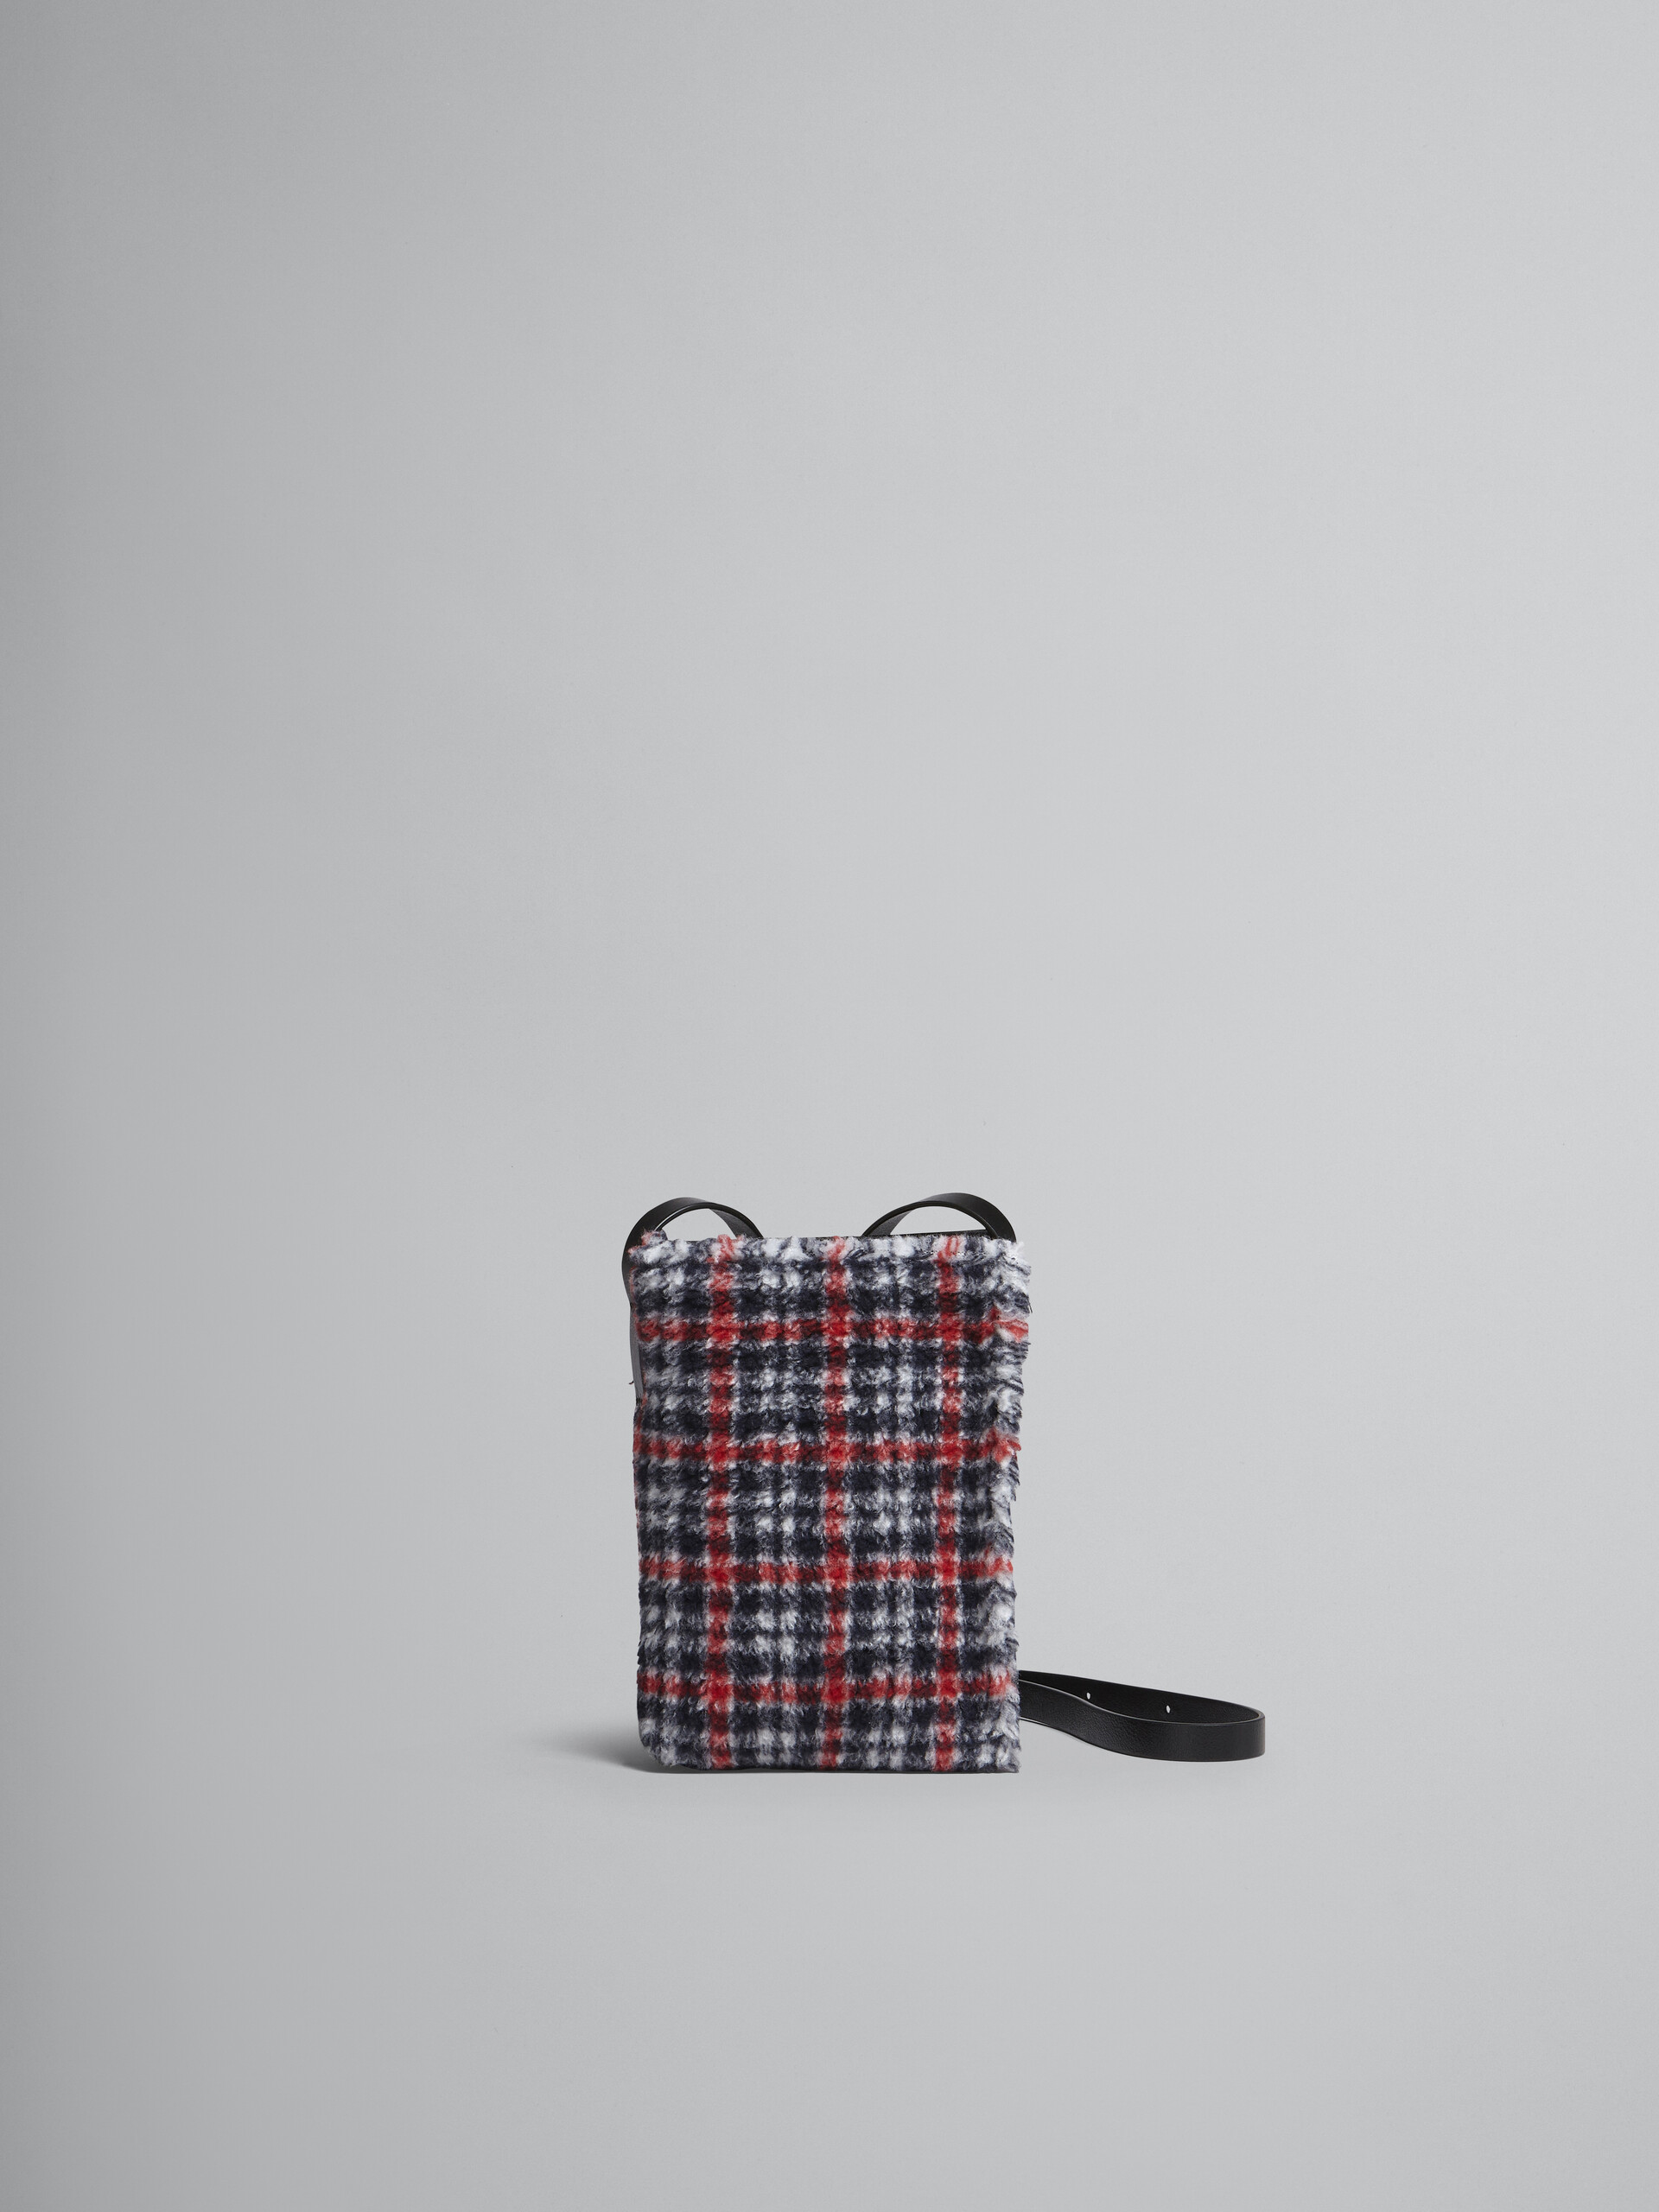 MUSEO SOFT small bag in red check fabric - Shoulder Bags - Image 1